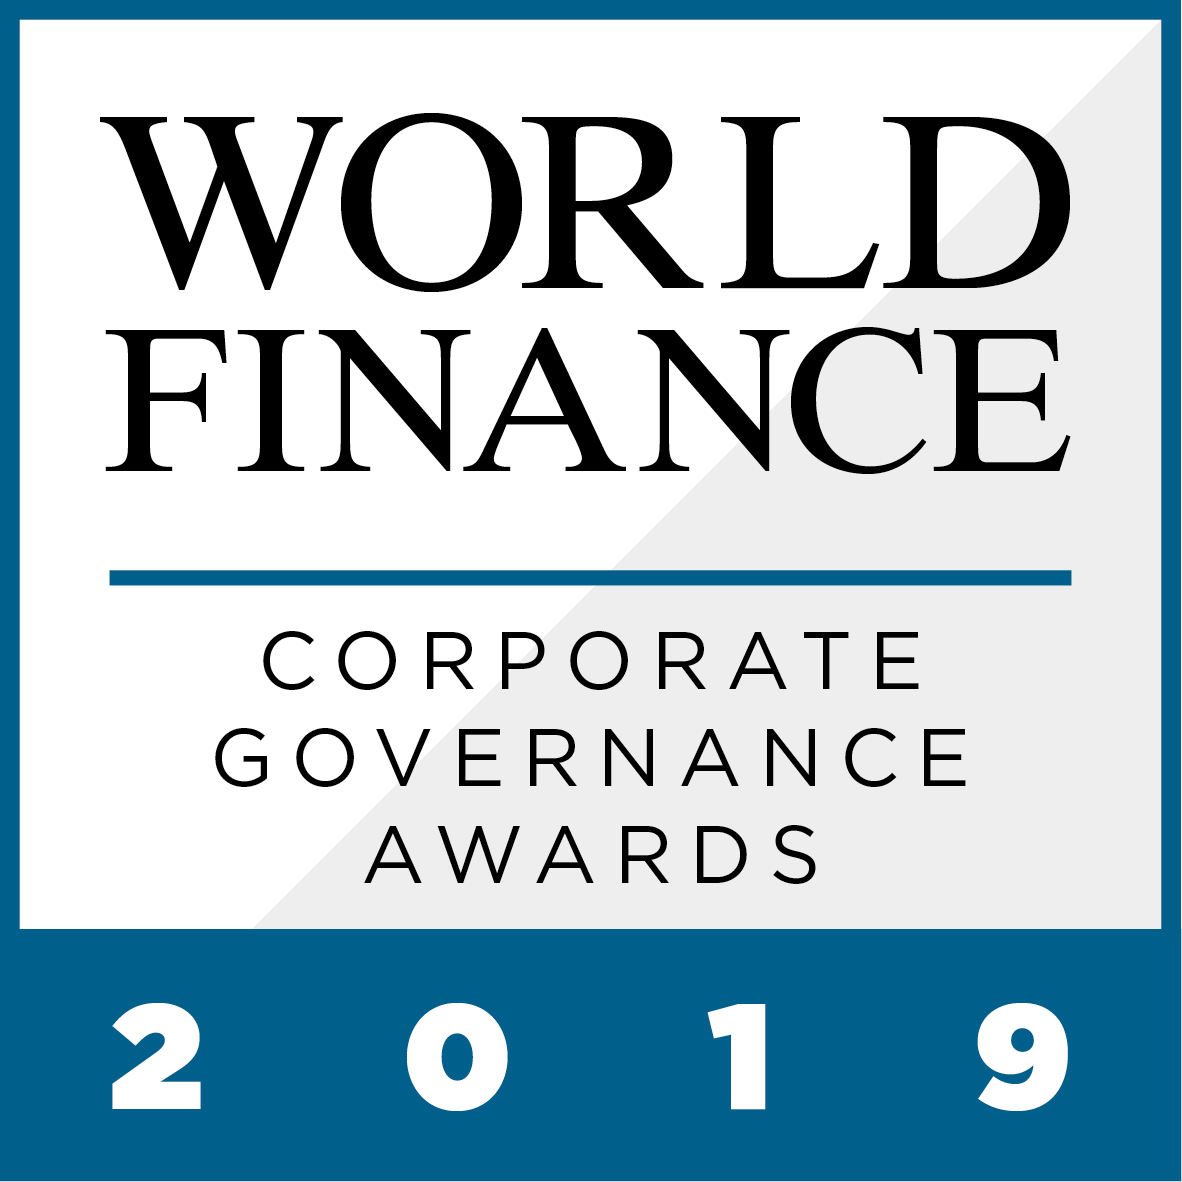 With board members set to face increasing scrutiny from investors in 2019, the World Finance Corporate Governance Awards commend companies with a proven track record of excellence in governance